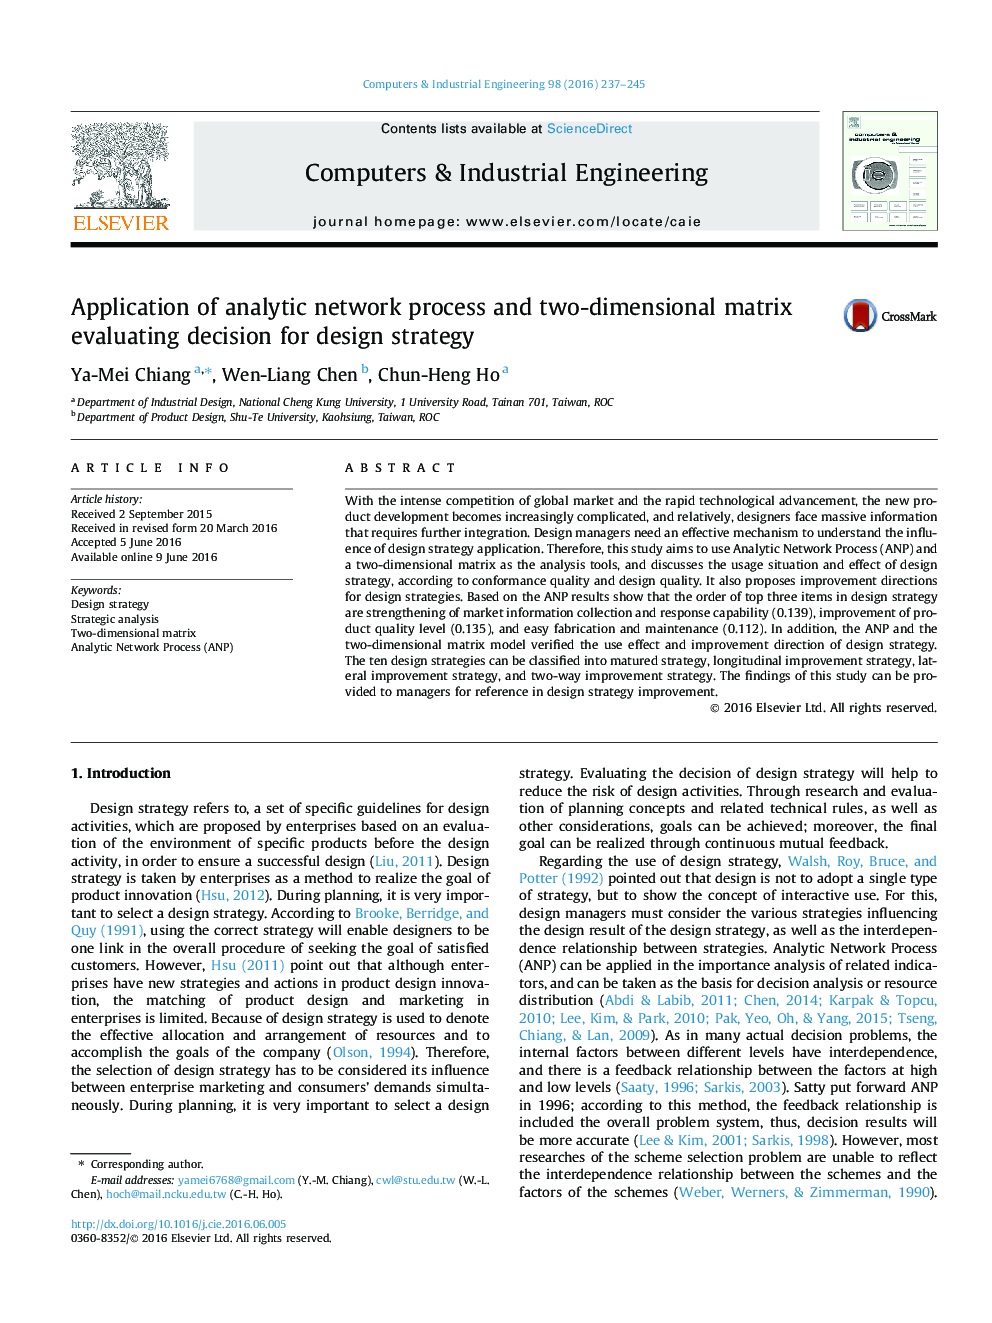 Application of analytic network process and two-dimensional matrix evaluating decision for design strategy